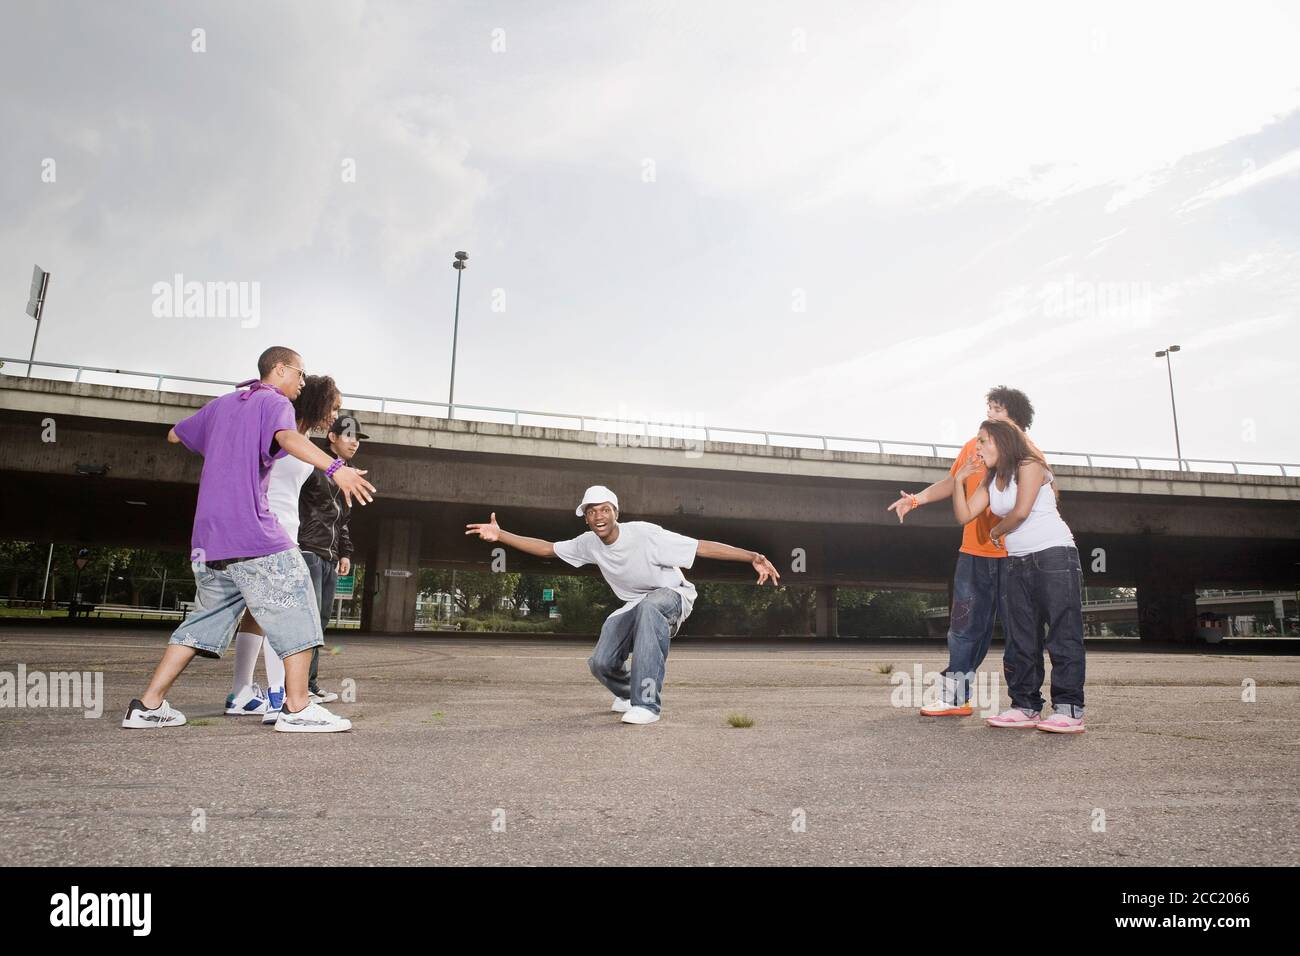 Germany, Cologne, Group of young people breakdancing on street Stock Photo